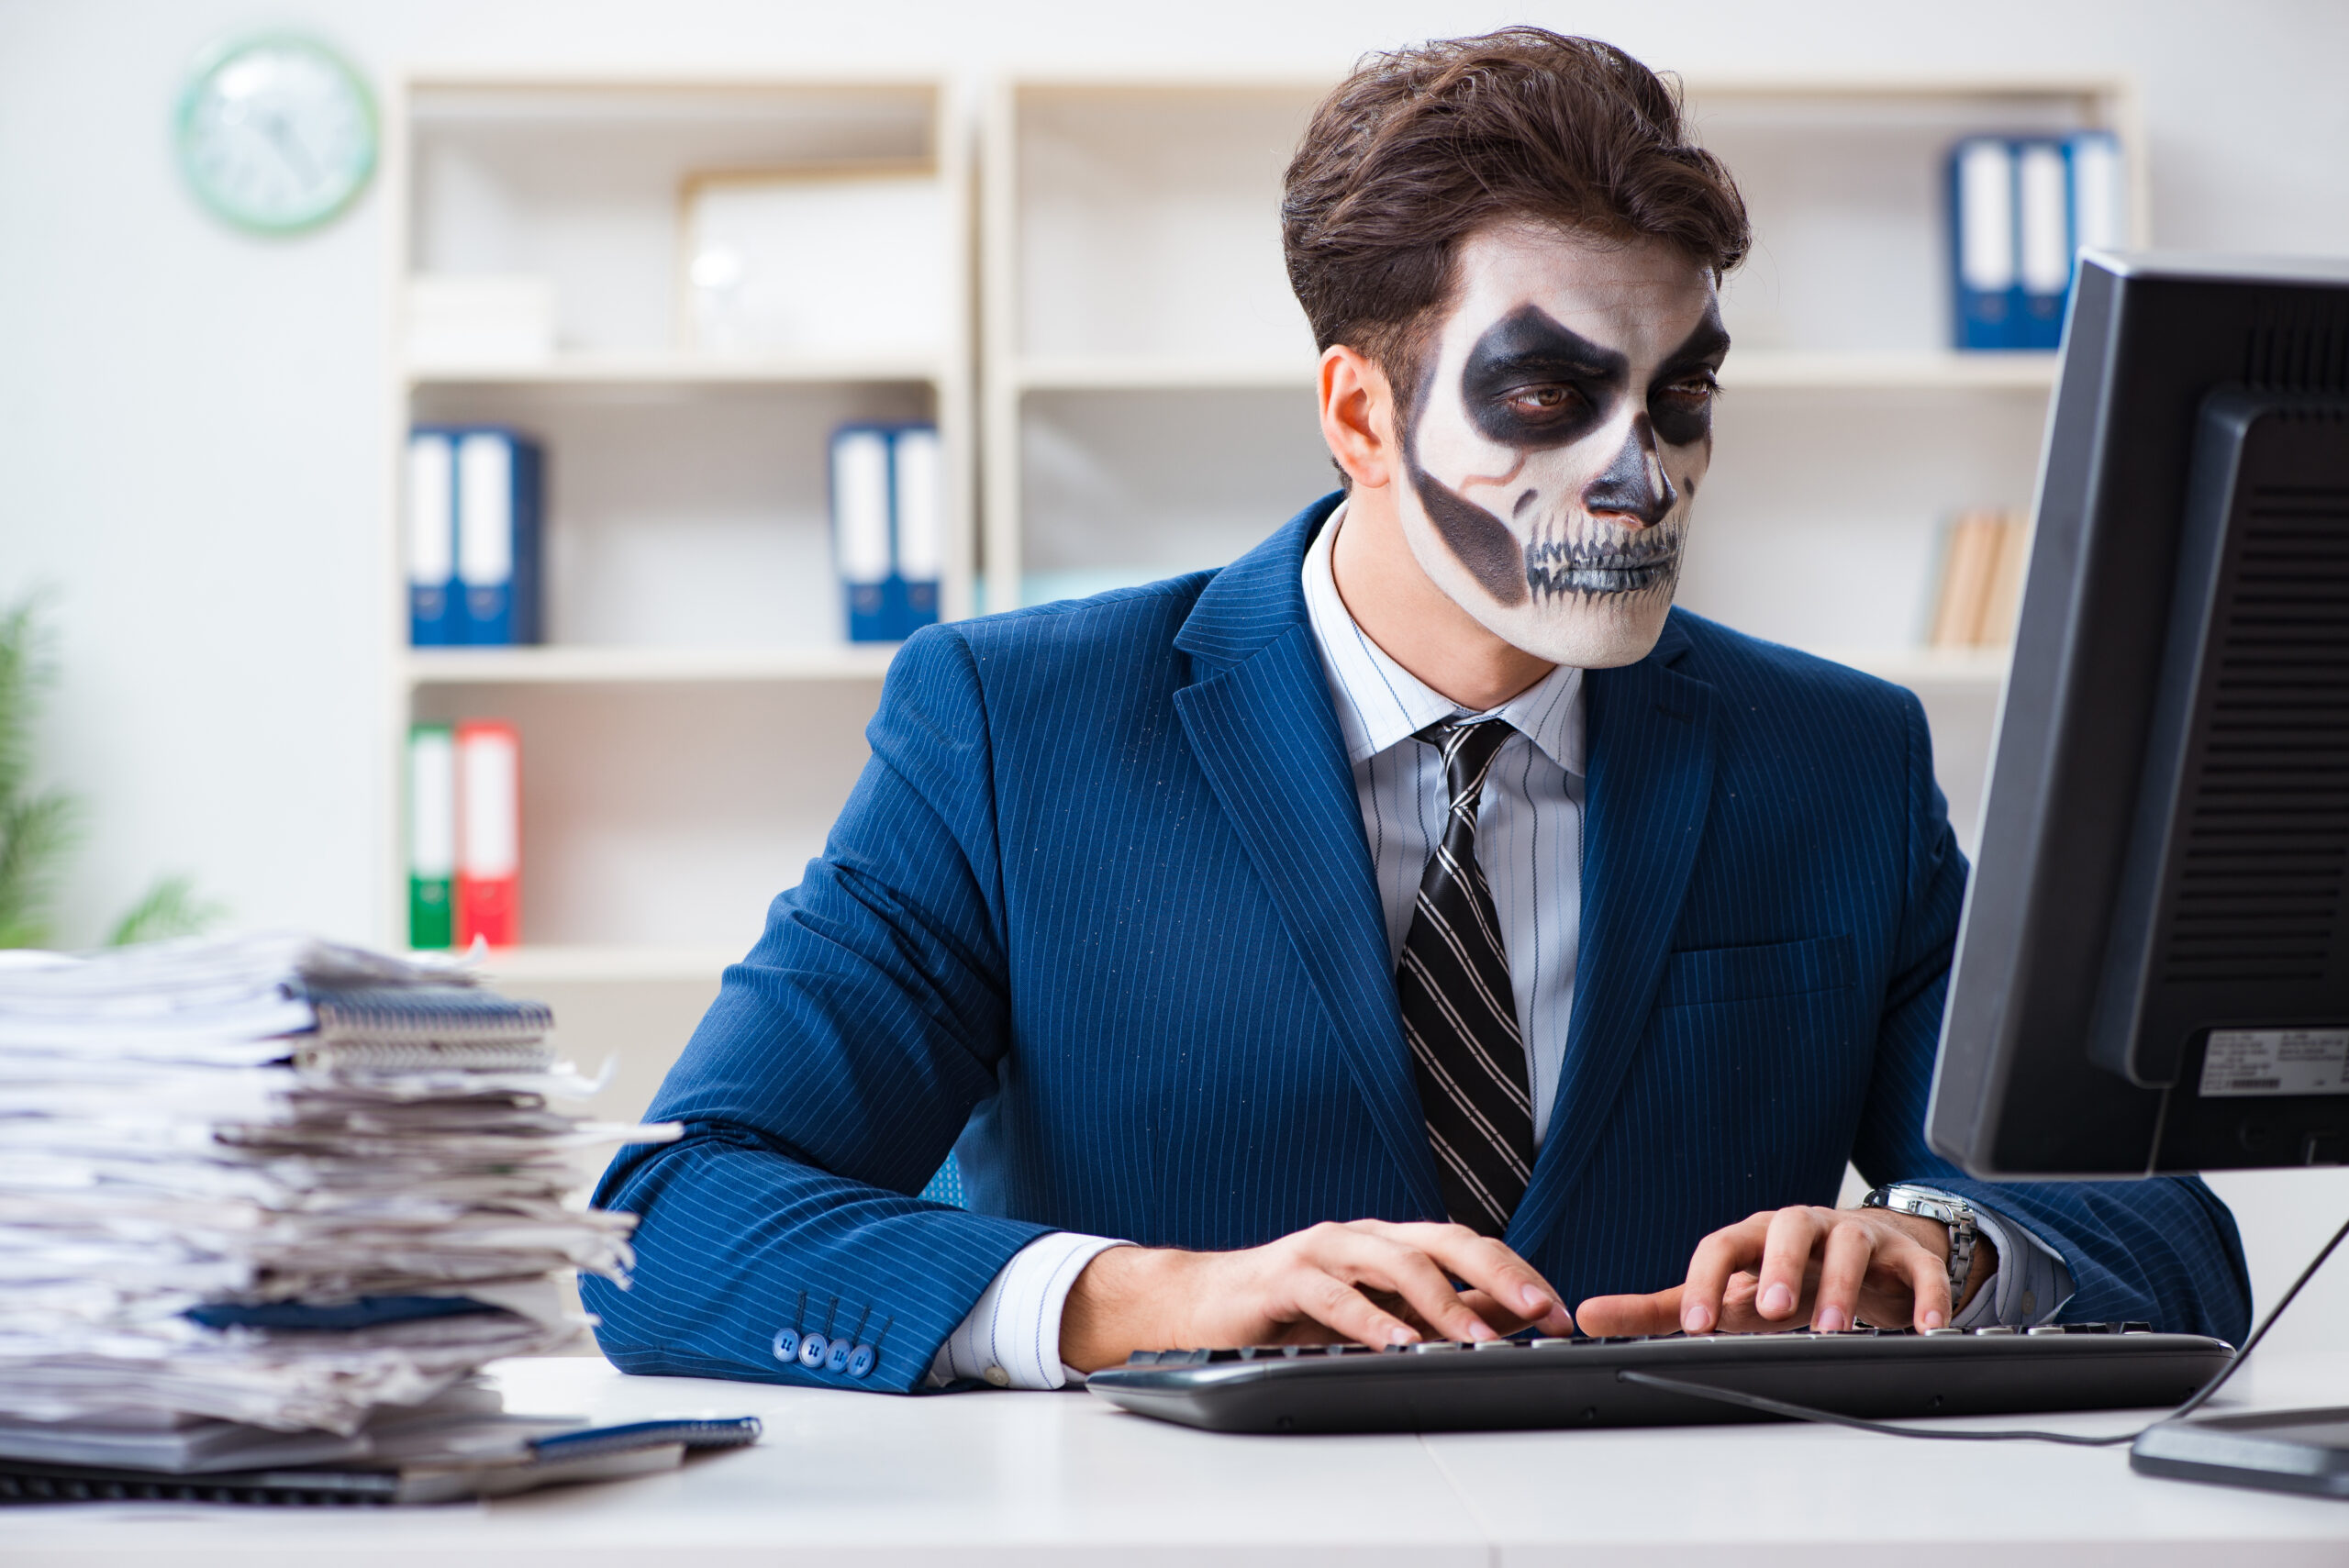 An accountant wearing Halloween attire, sitting at a desk adorned with spooky decorations, while focused on financial documents and calculations.